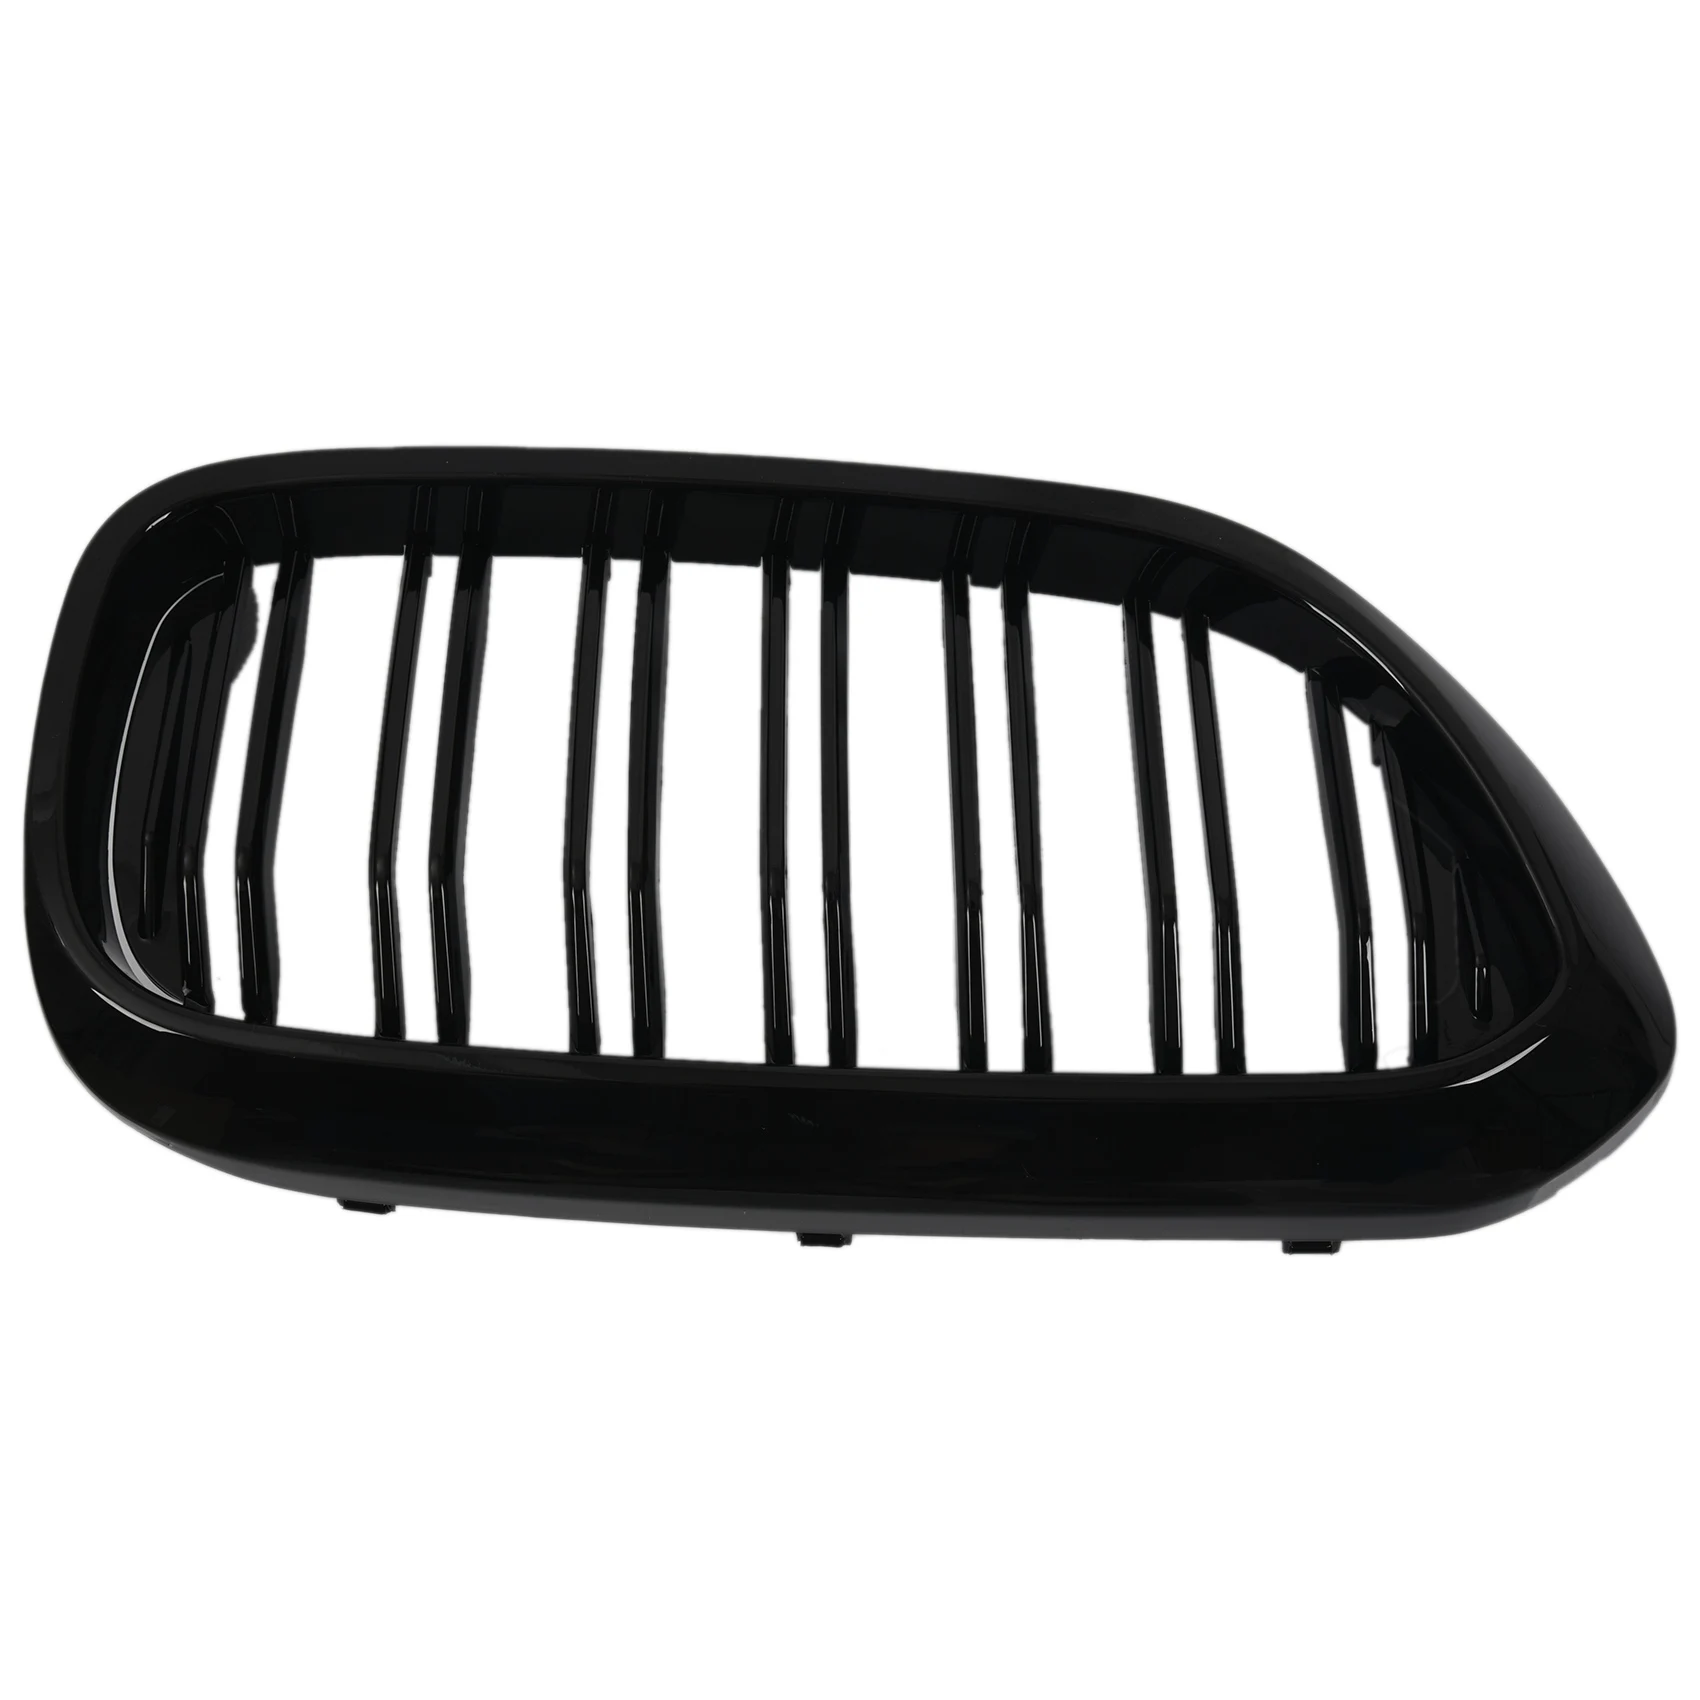 

Front Bumper Kidney Grille Grill for G30 G31 G38 5 Series 525I 530I 540I 550I with M-Performance Black Double Line Kidney Grill